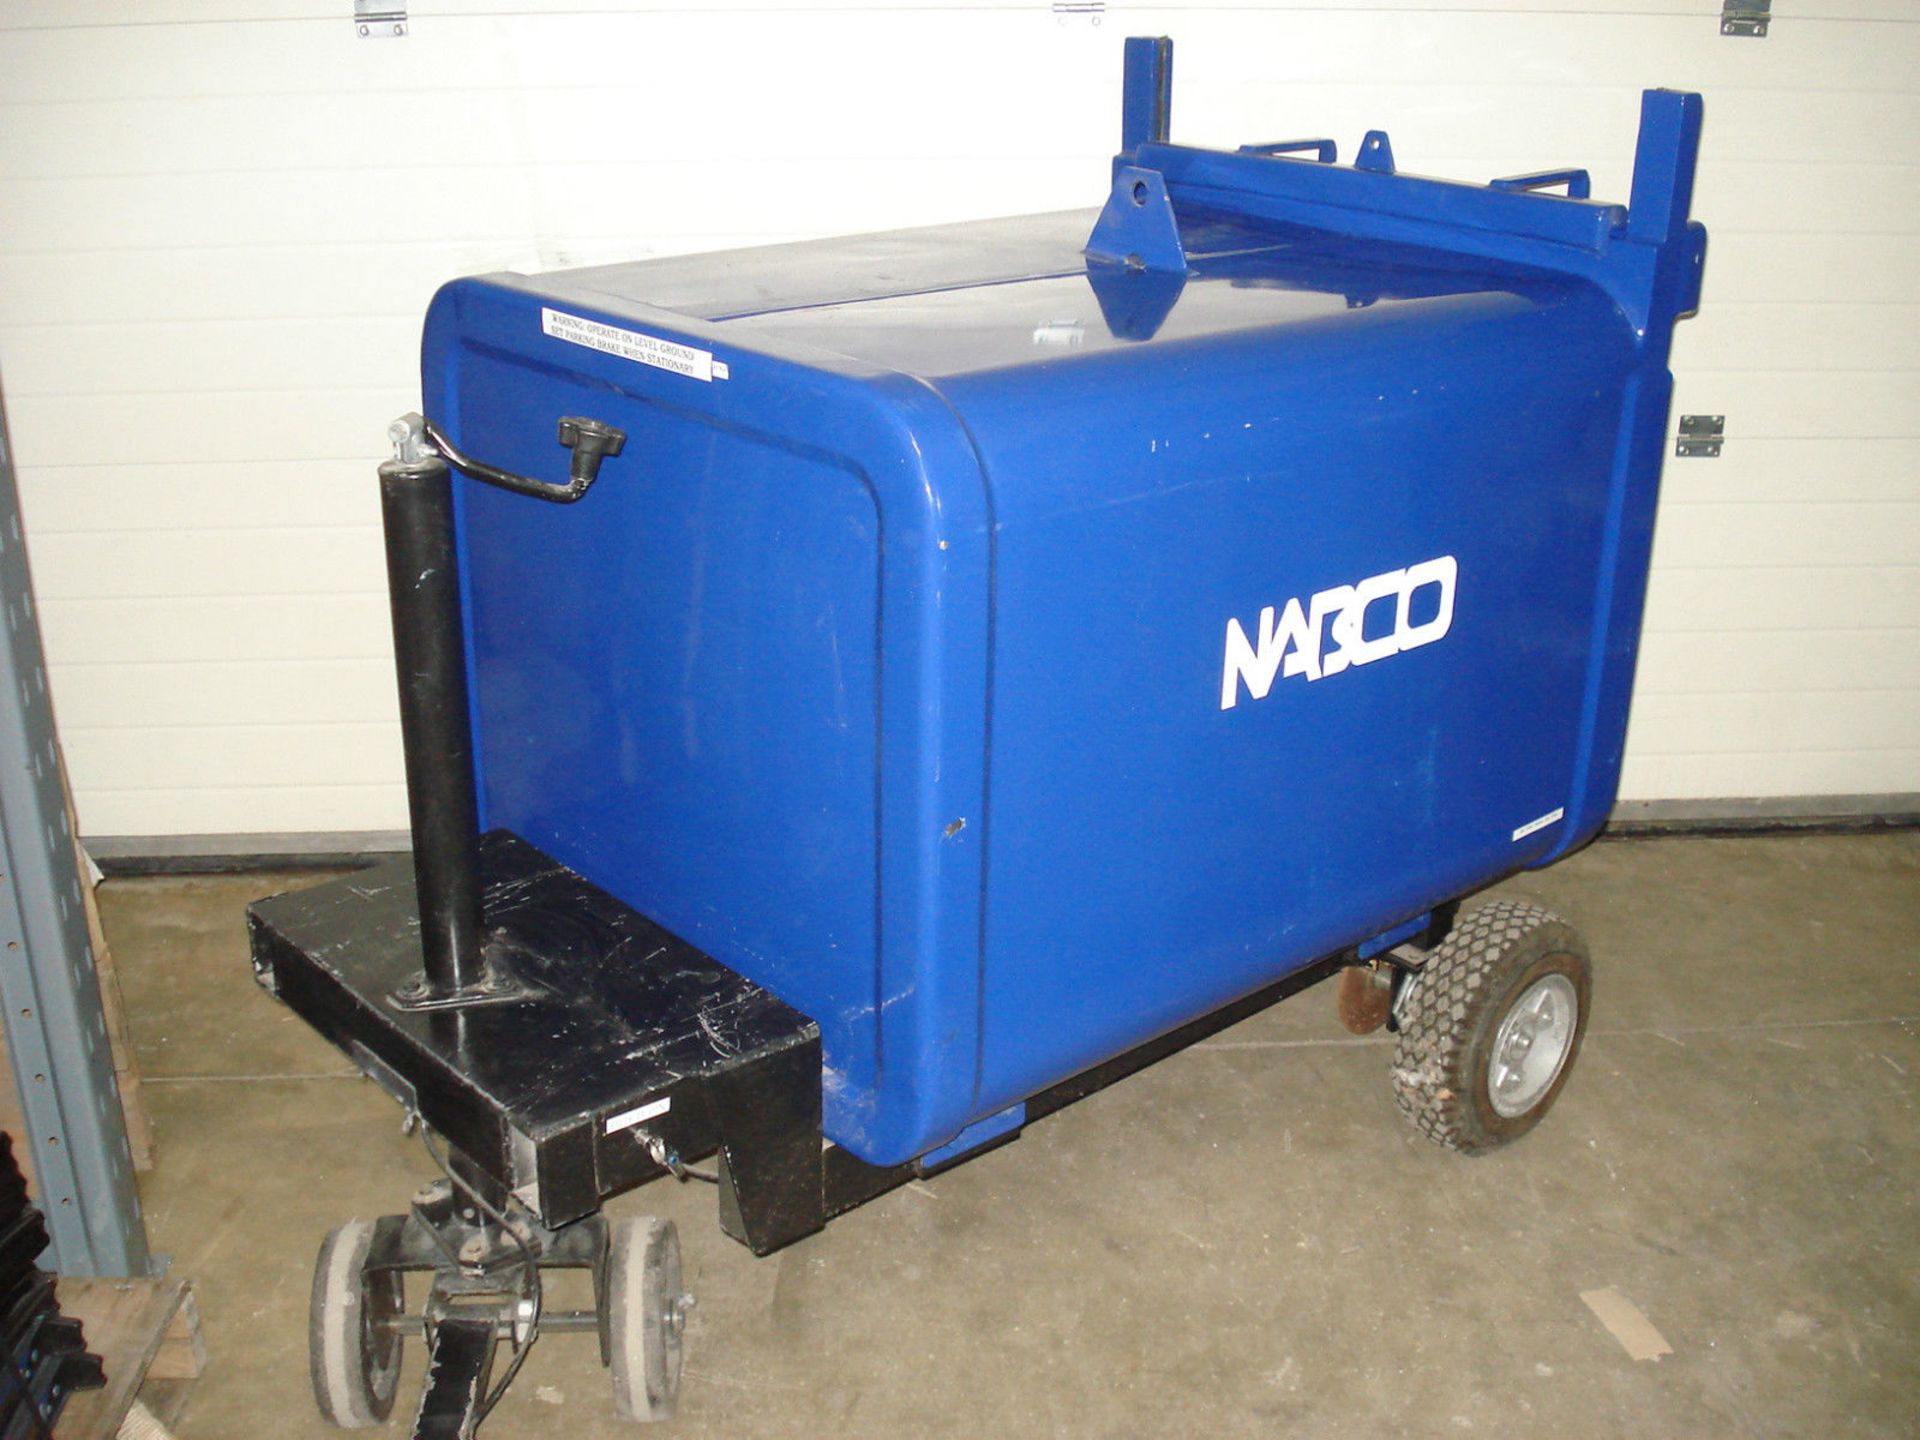 Nabco Suspect Luggage and Parcel Containment Vessel - Will take a parcel 24" wide by 32" long and - Image 7 of 7